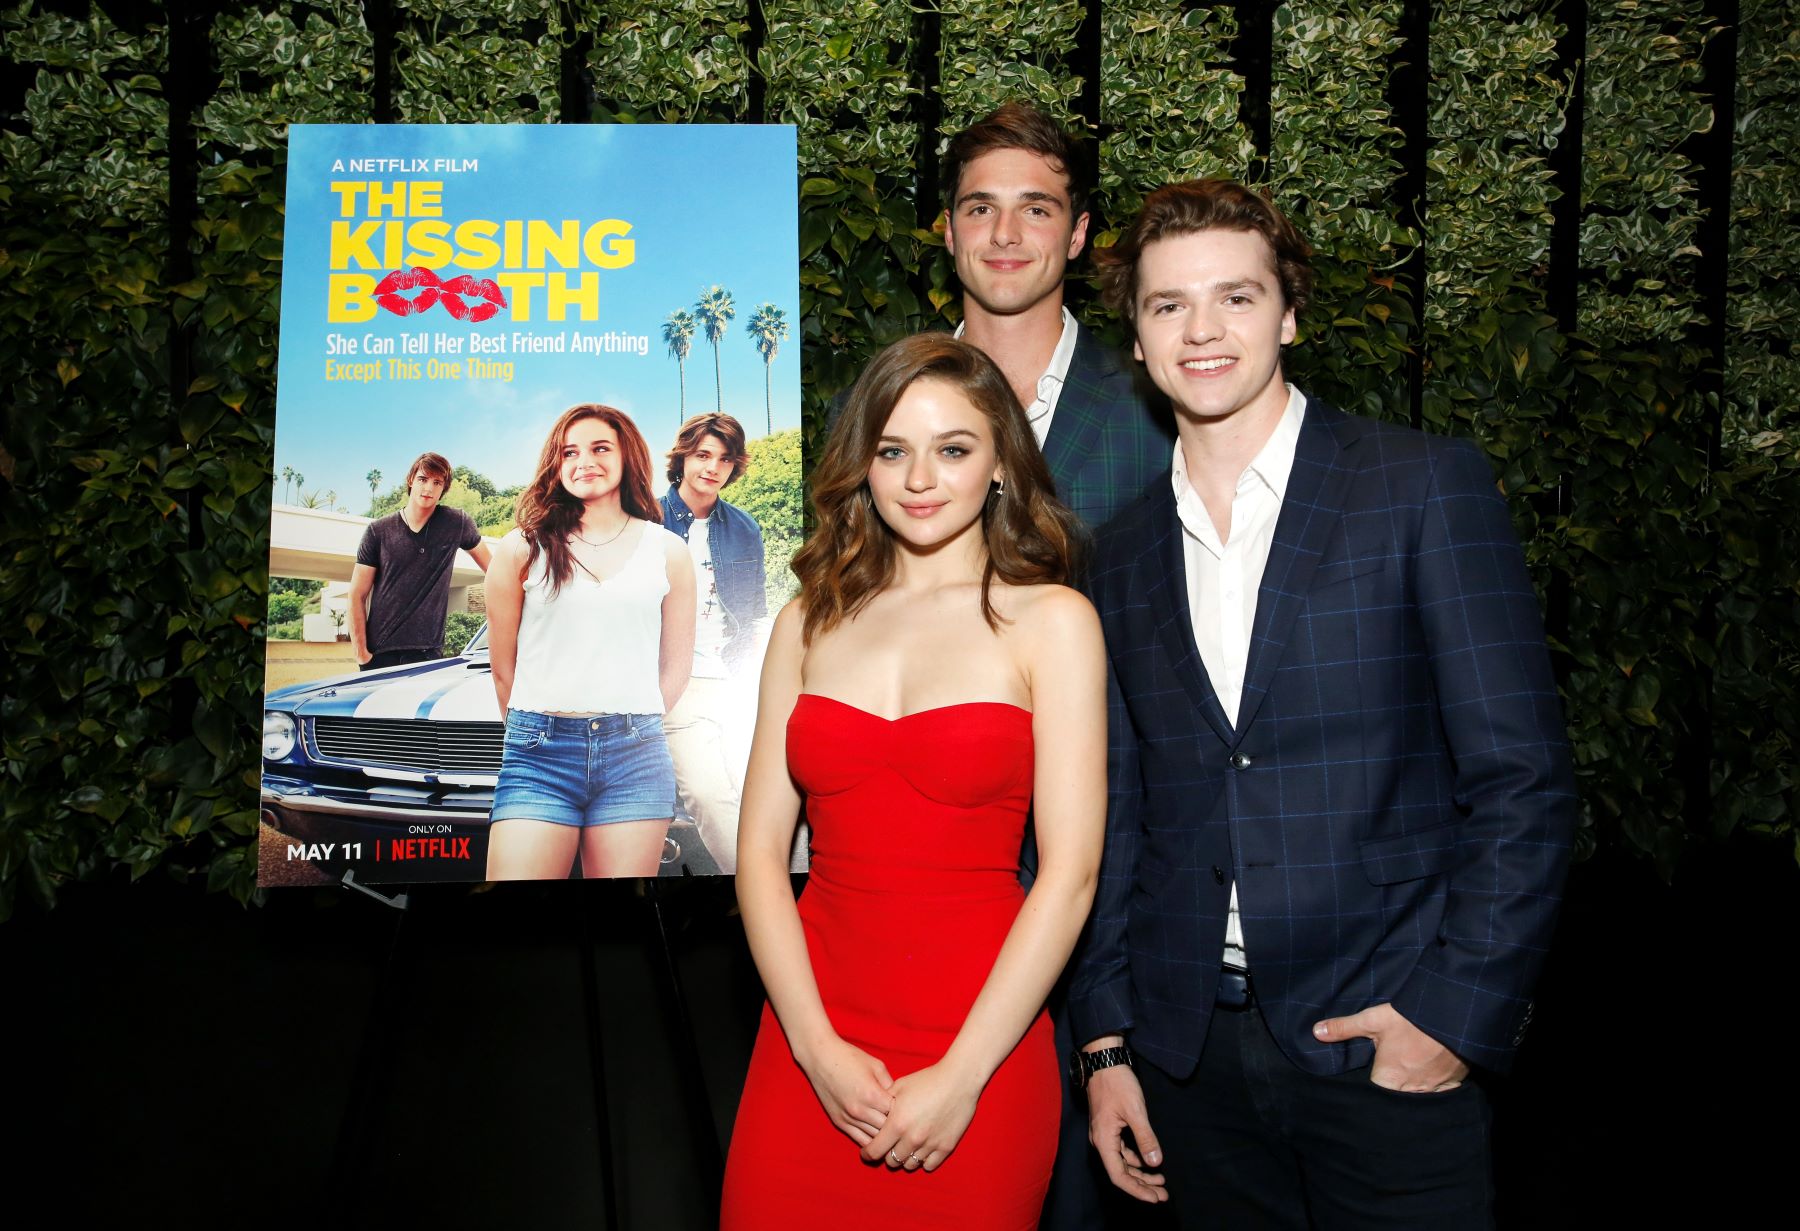 'The Kissing Booth' cast of Jacob Elordi, Joey King, and Joel Courtney attending a screening of the movie in Los Angeles, California